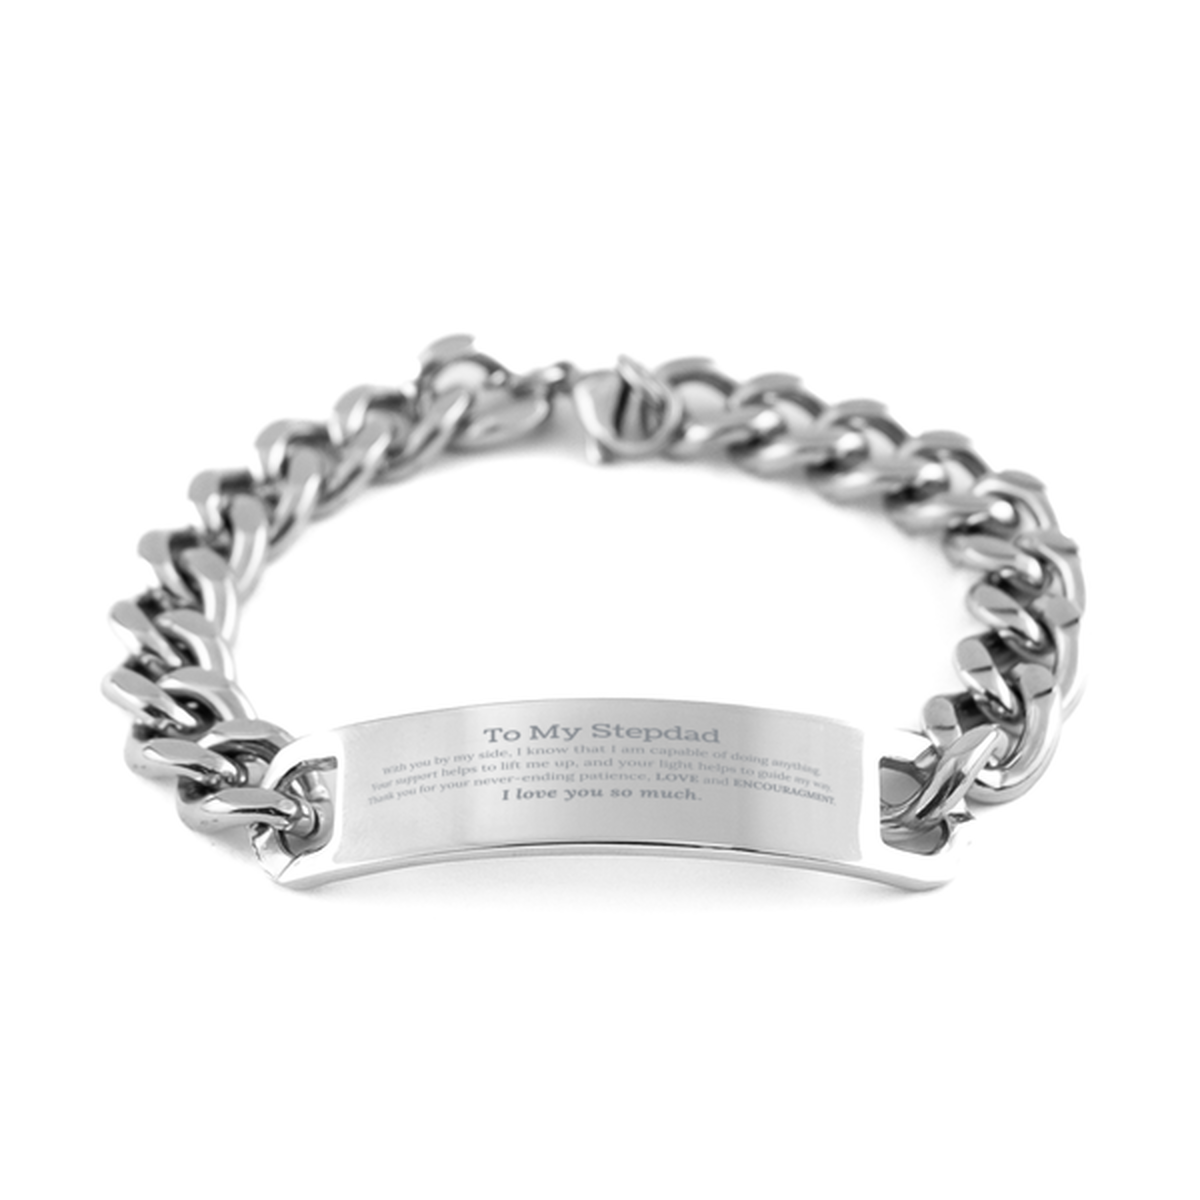 Appreciation Stepdad Cuban Chain Stainless Steel Bracelet Gifts, To My Stepdad Birthday Christmas Wedding Keepsake Gifts for Stepdad With you by my side, I know that I am capable of doing anything. I love you so much